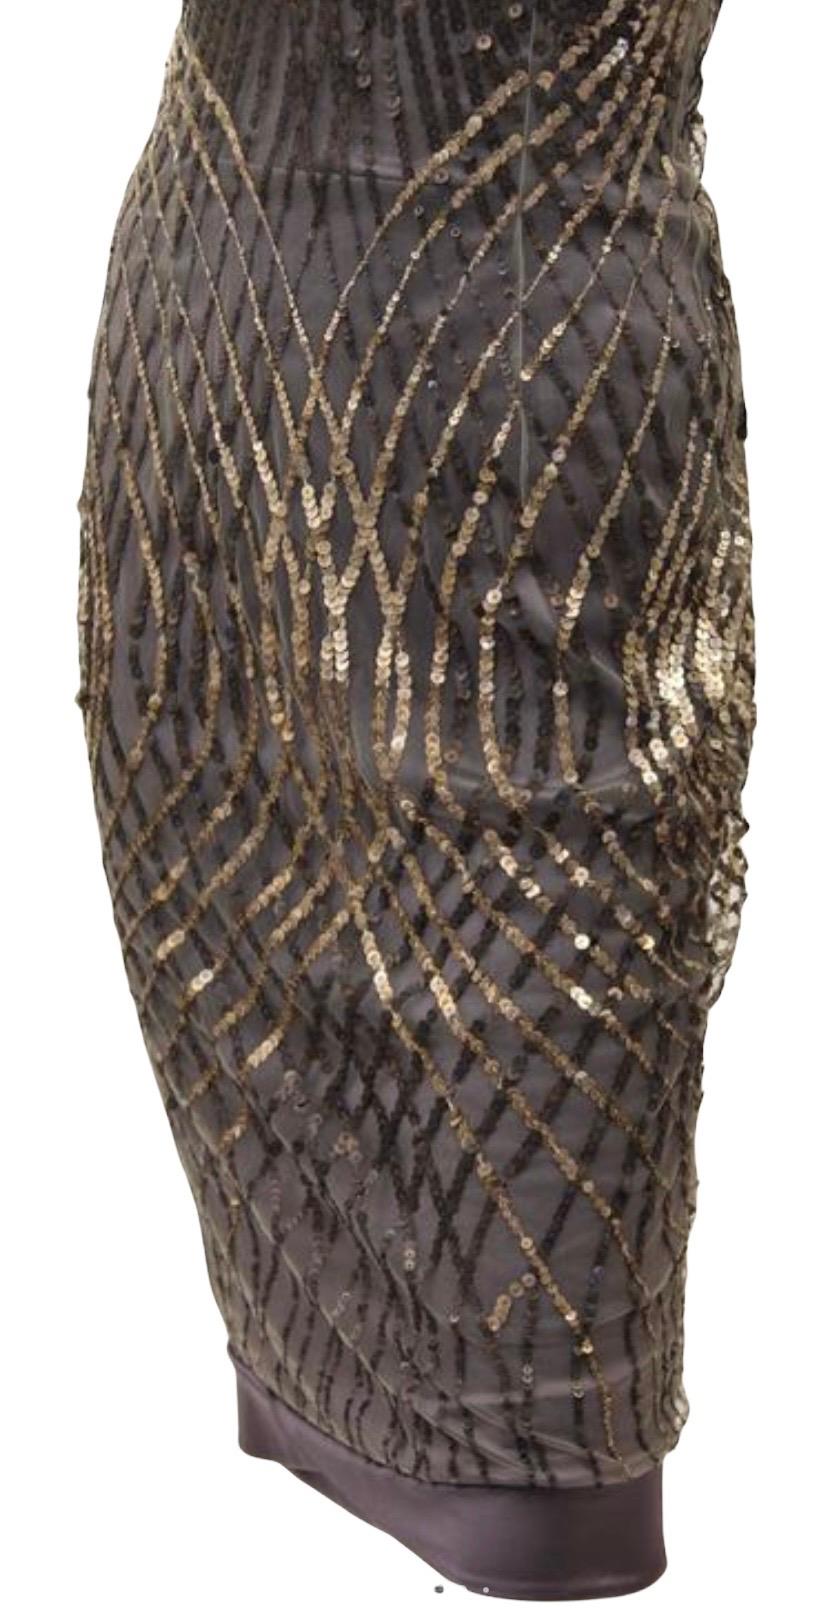 F/W 2005 Vintage GUCCI Sequin Embellished Dress by Alessandra Facchinetti For Sale 1